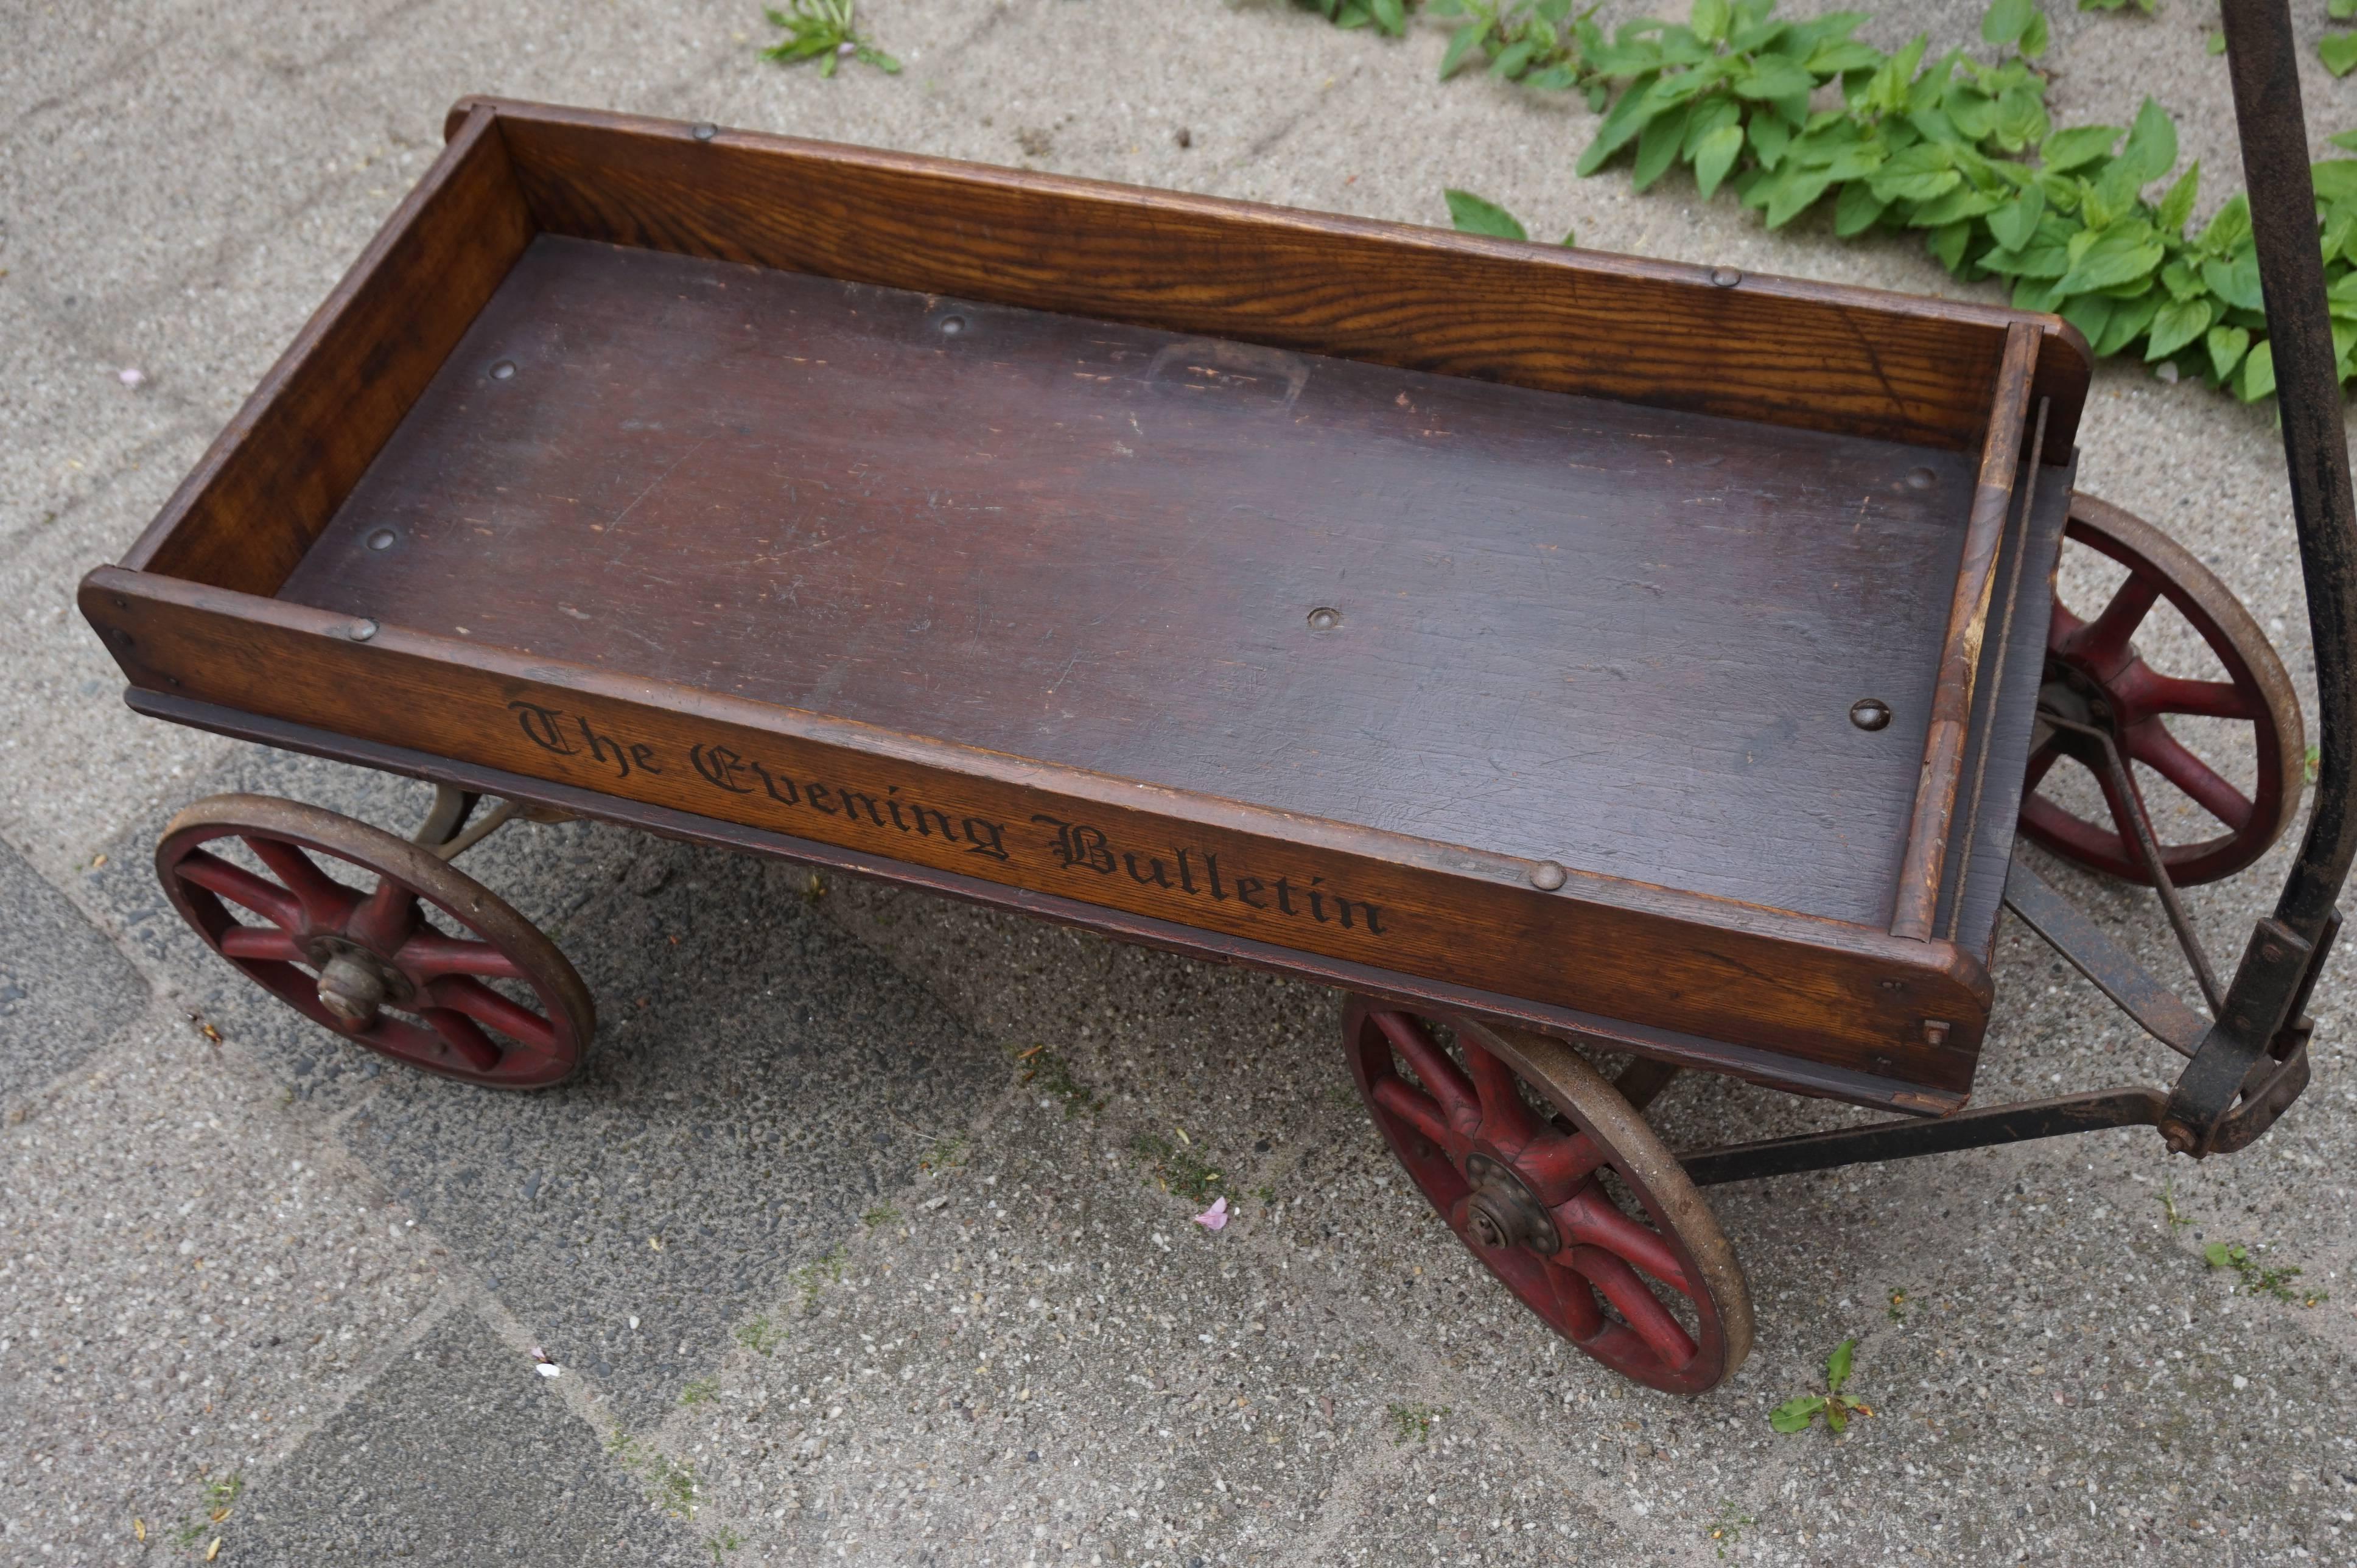 20th Century Antique American Newspaper Cart Great as a Novelty Magazine Stand & Drinks Table